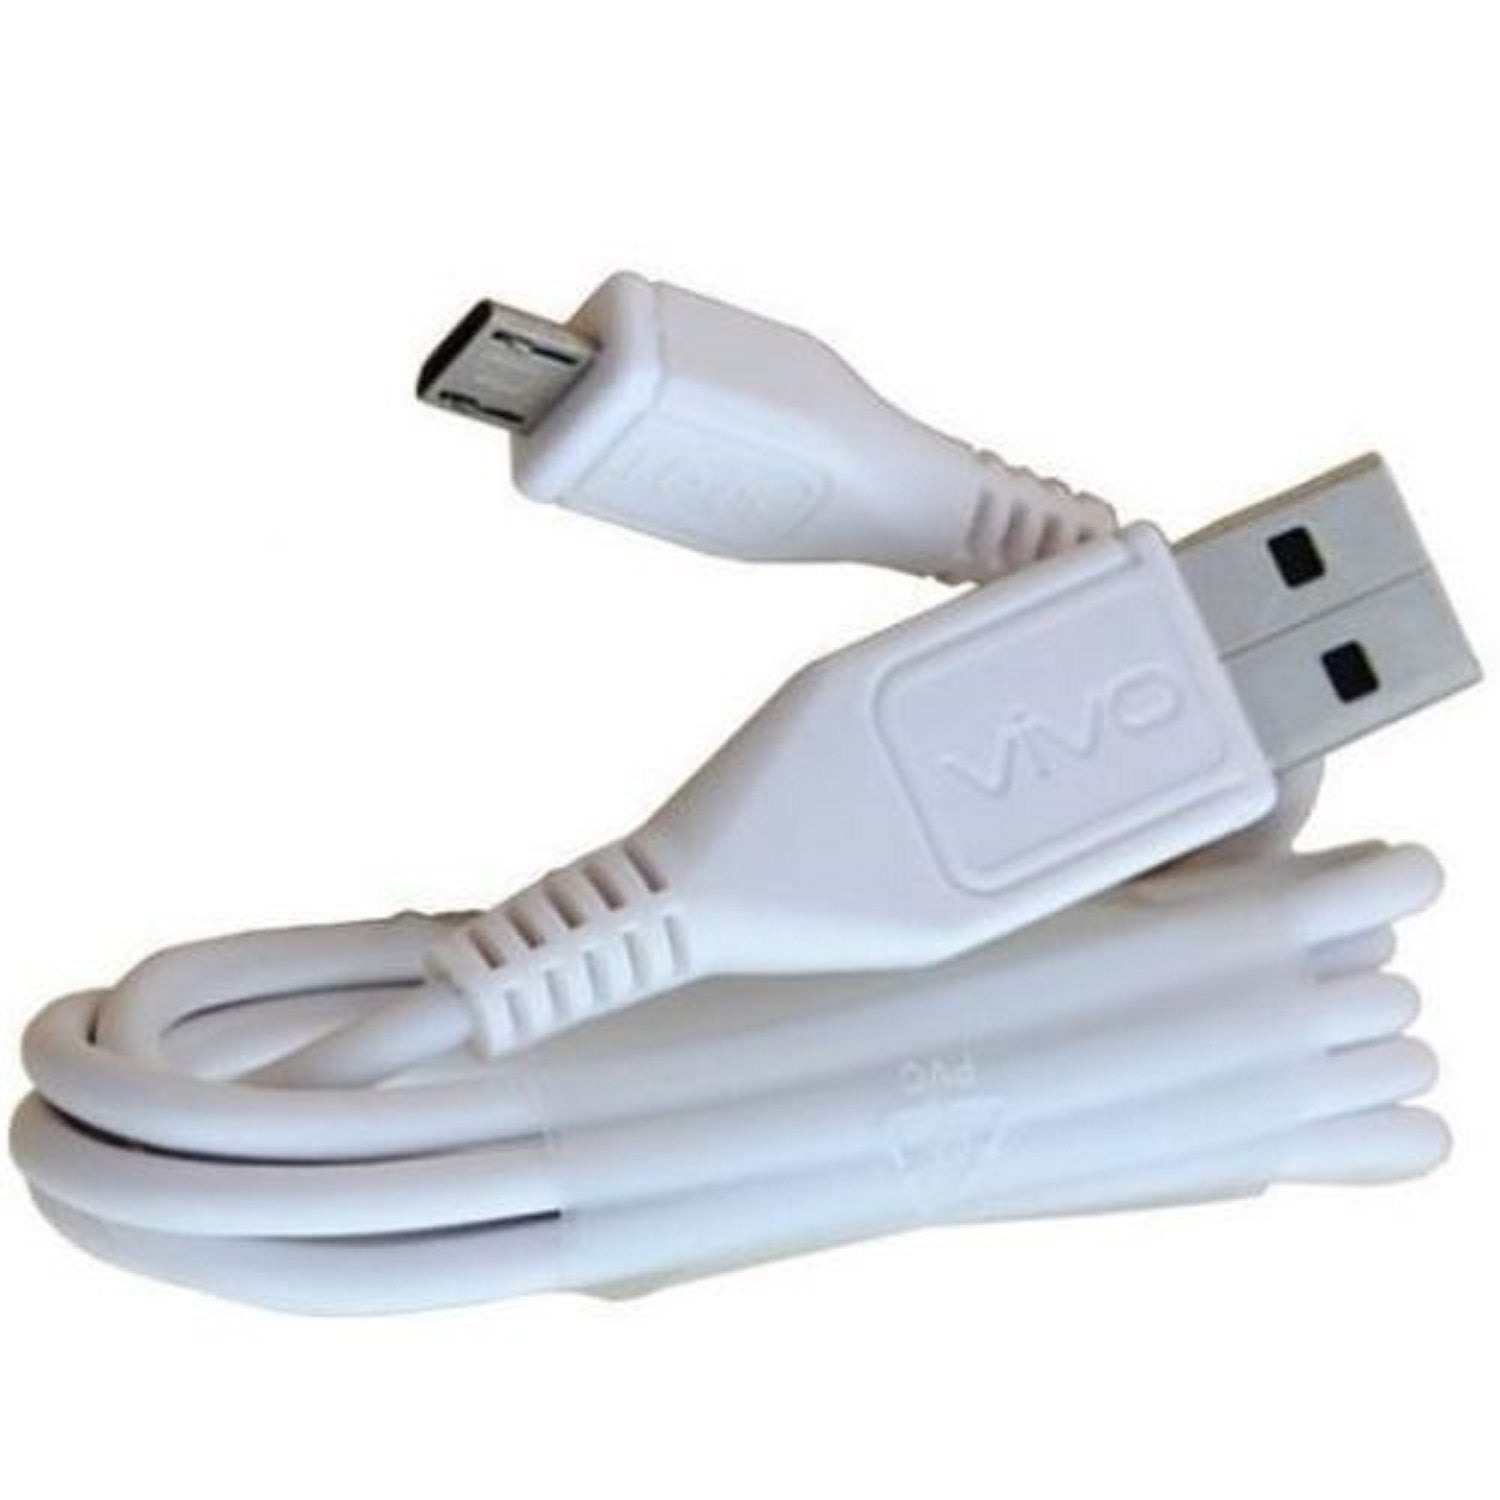 Vivo S1 Original Fast Charge Cable And Data Sync Cord-White-chargingcable.in